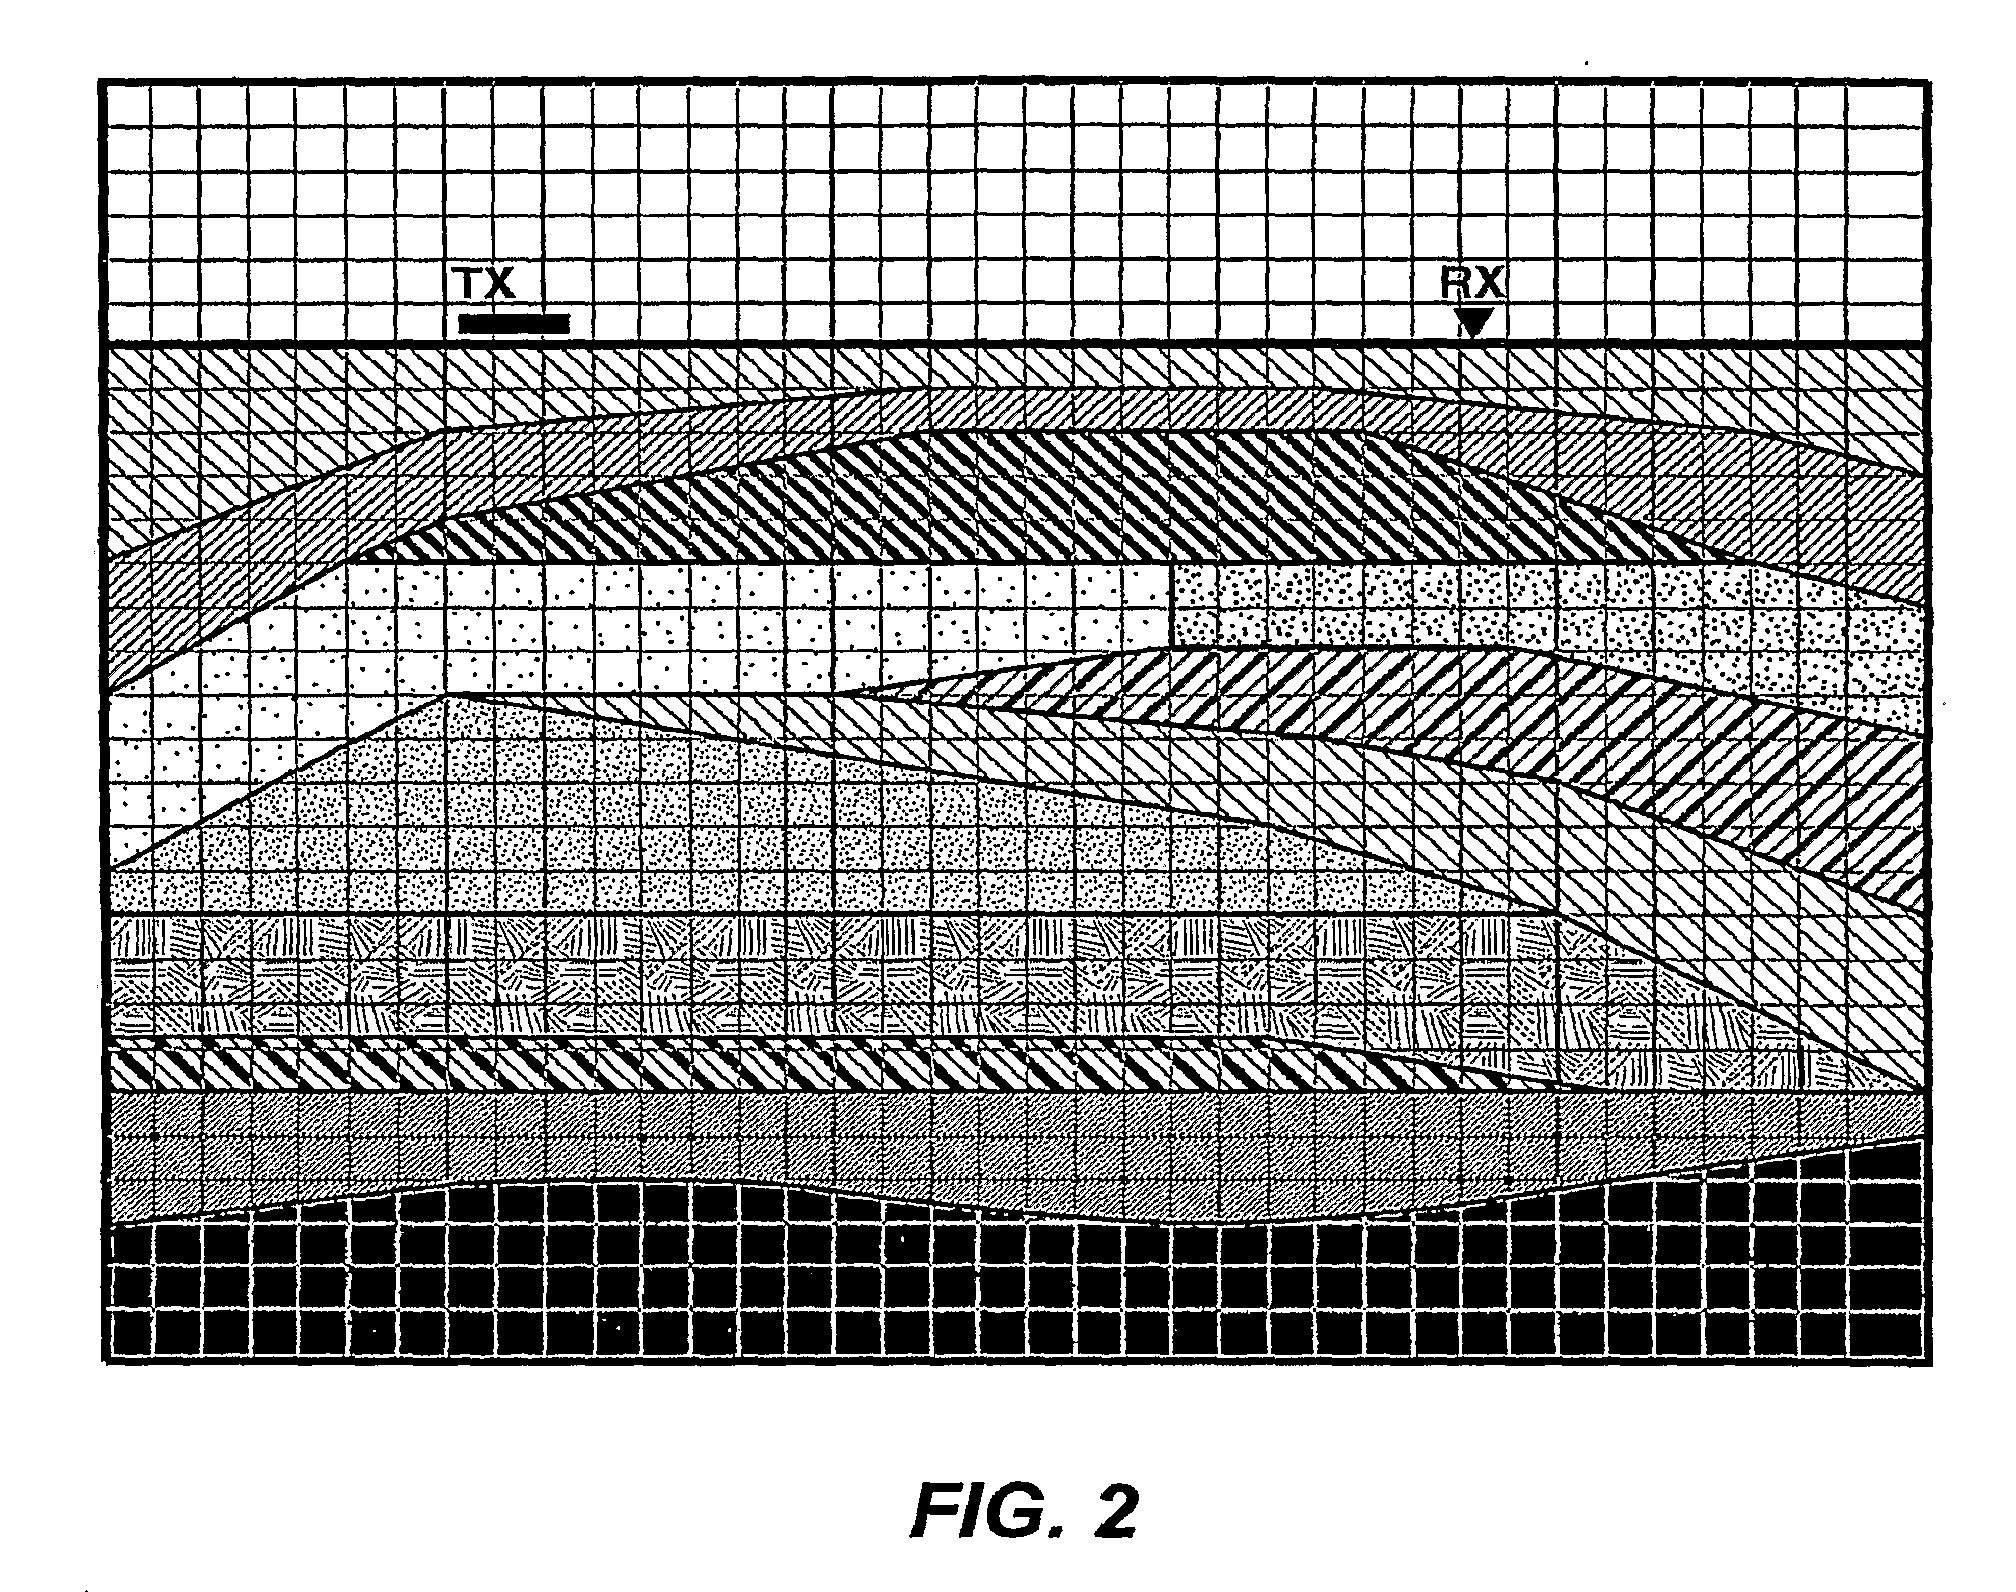 Method For Determining Physical Properties of Structures